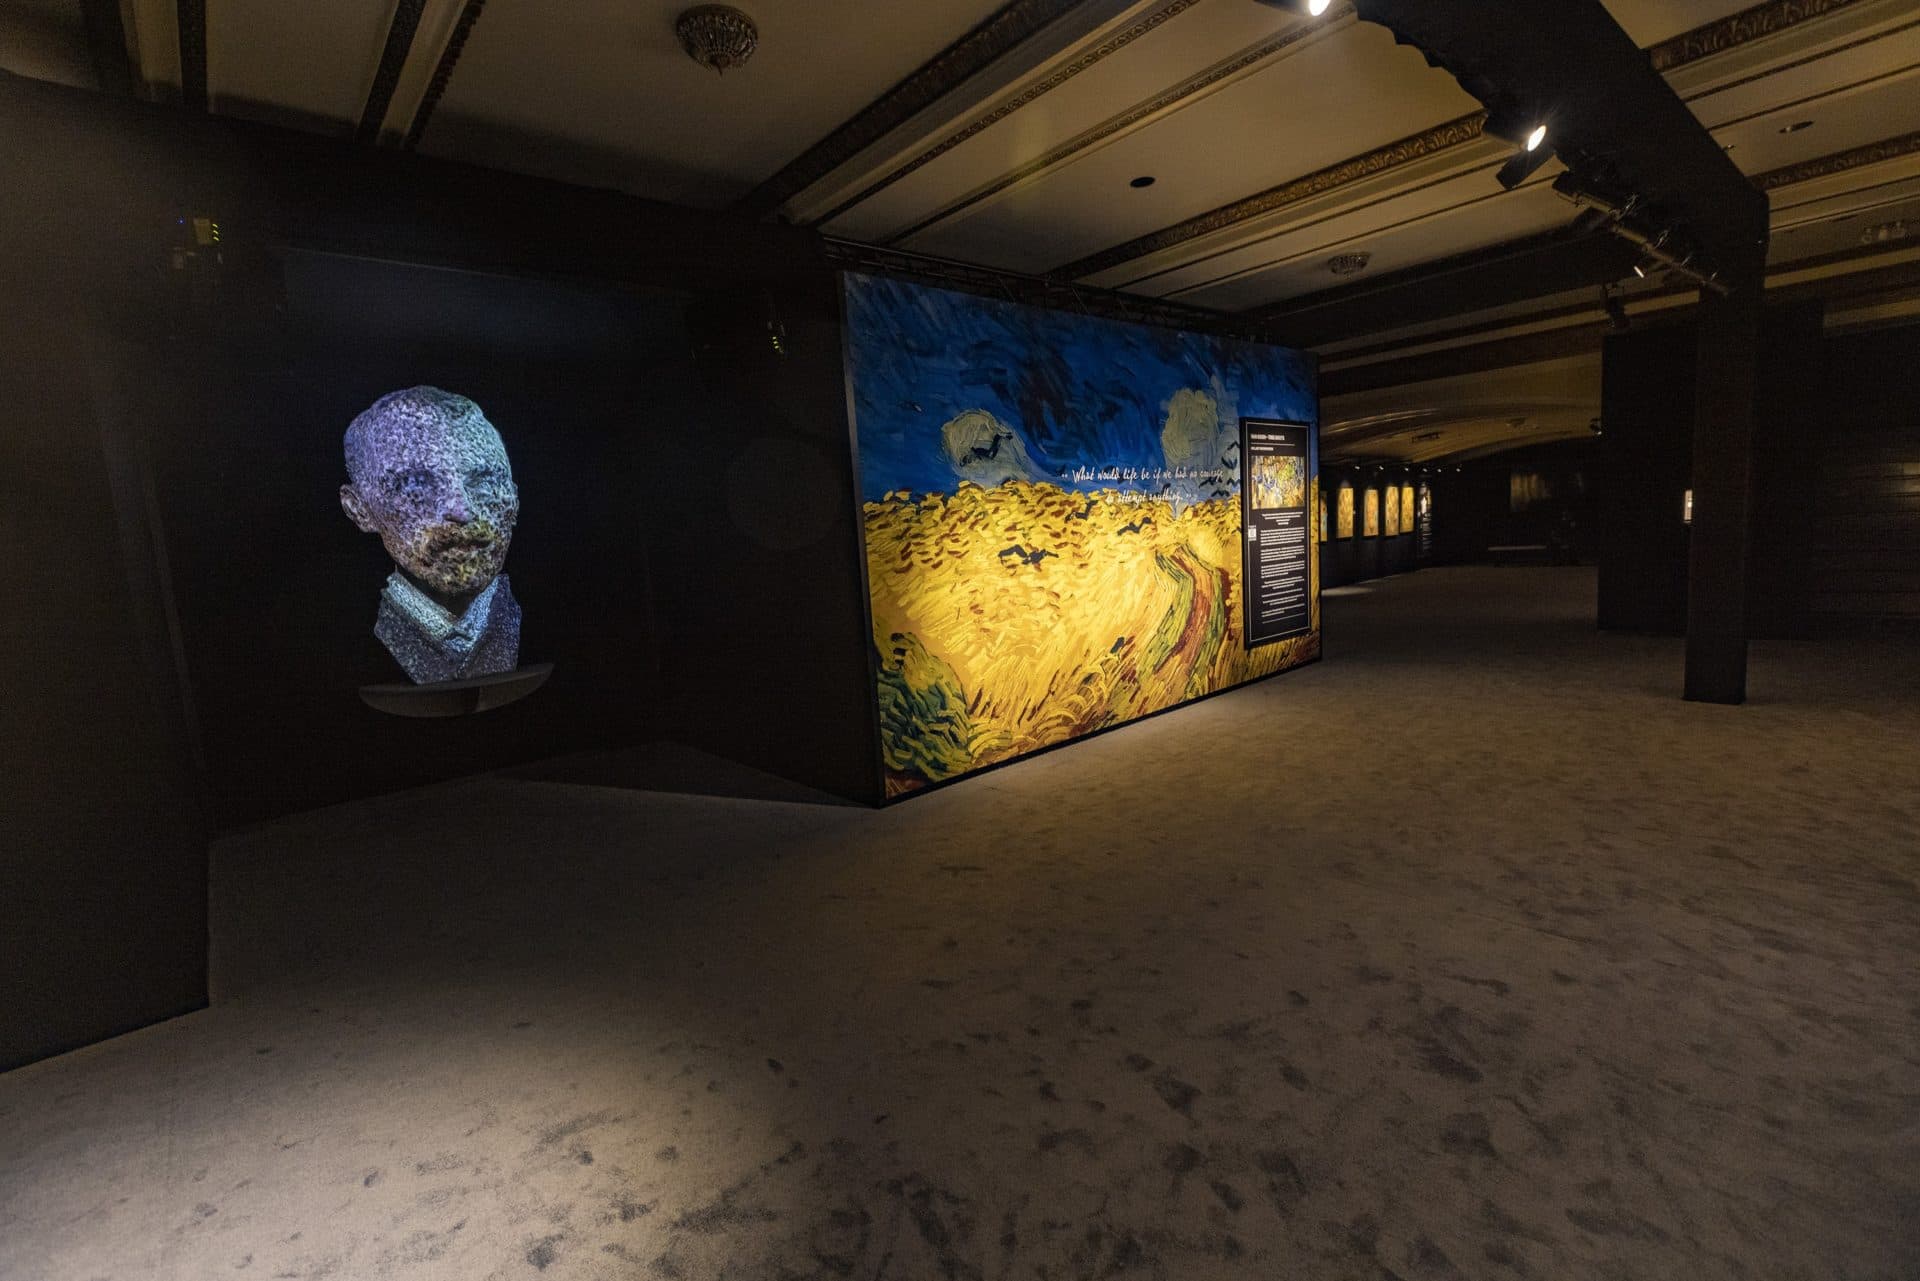 At the beginning of the exhibit, a bust of Vincent van Gogh is painted with various colors of light. (Jesse Costa/WBUR)